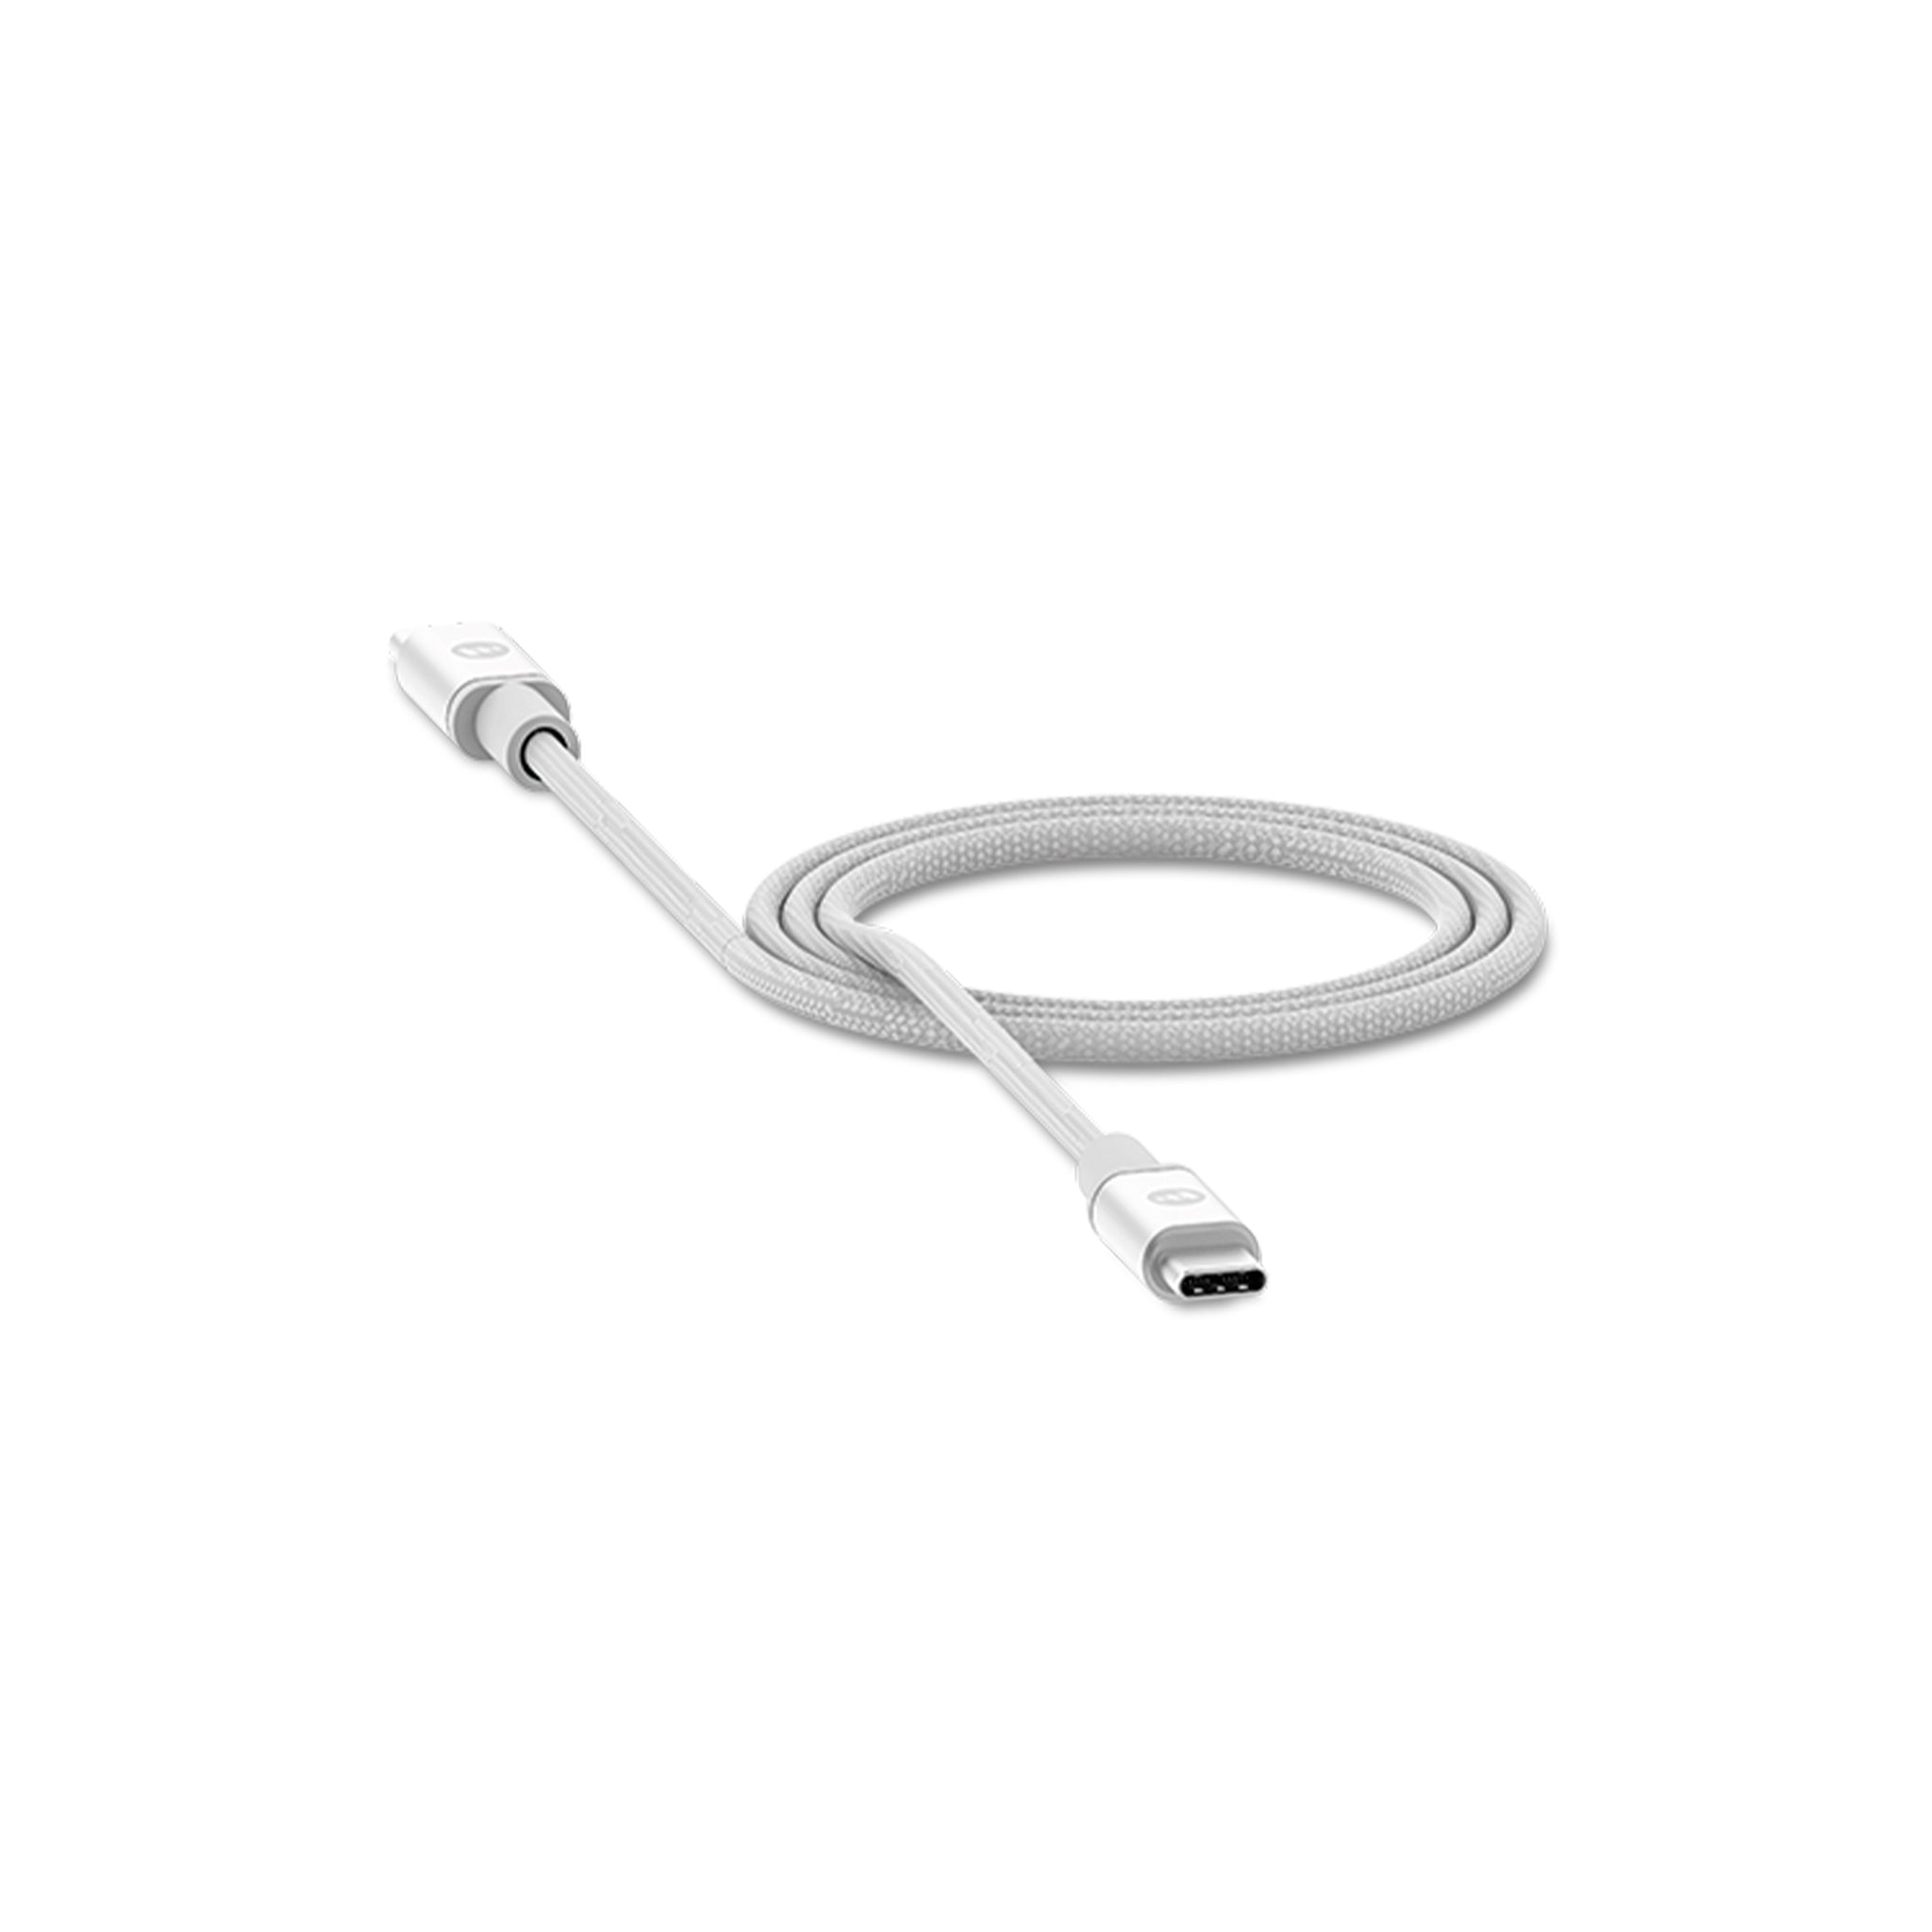 Mophie - Type C Cable 5ft - White